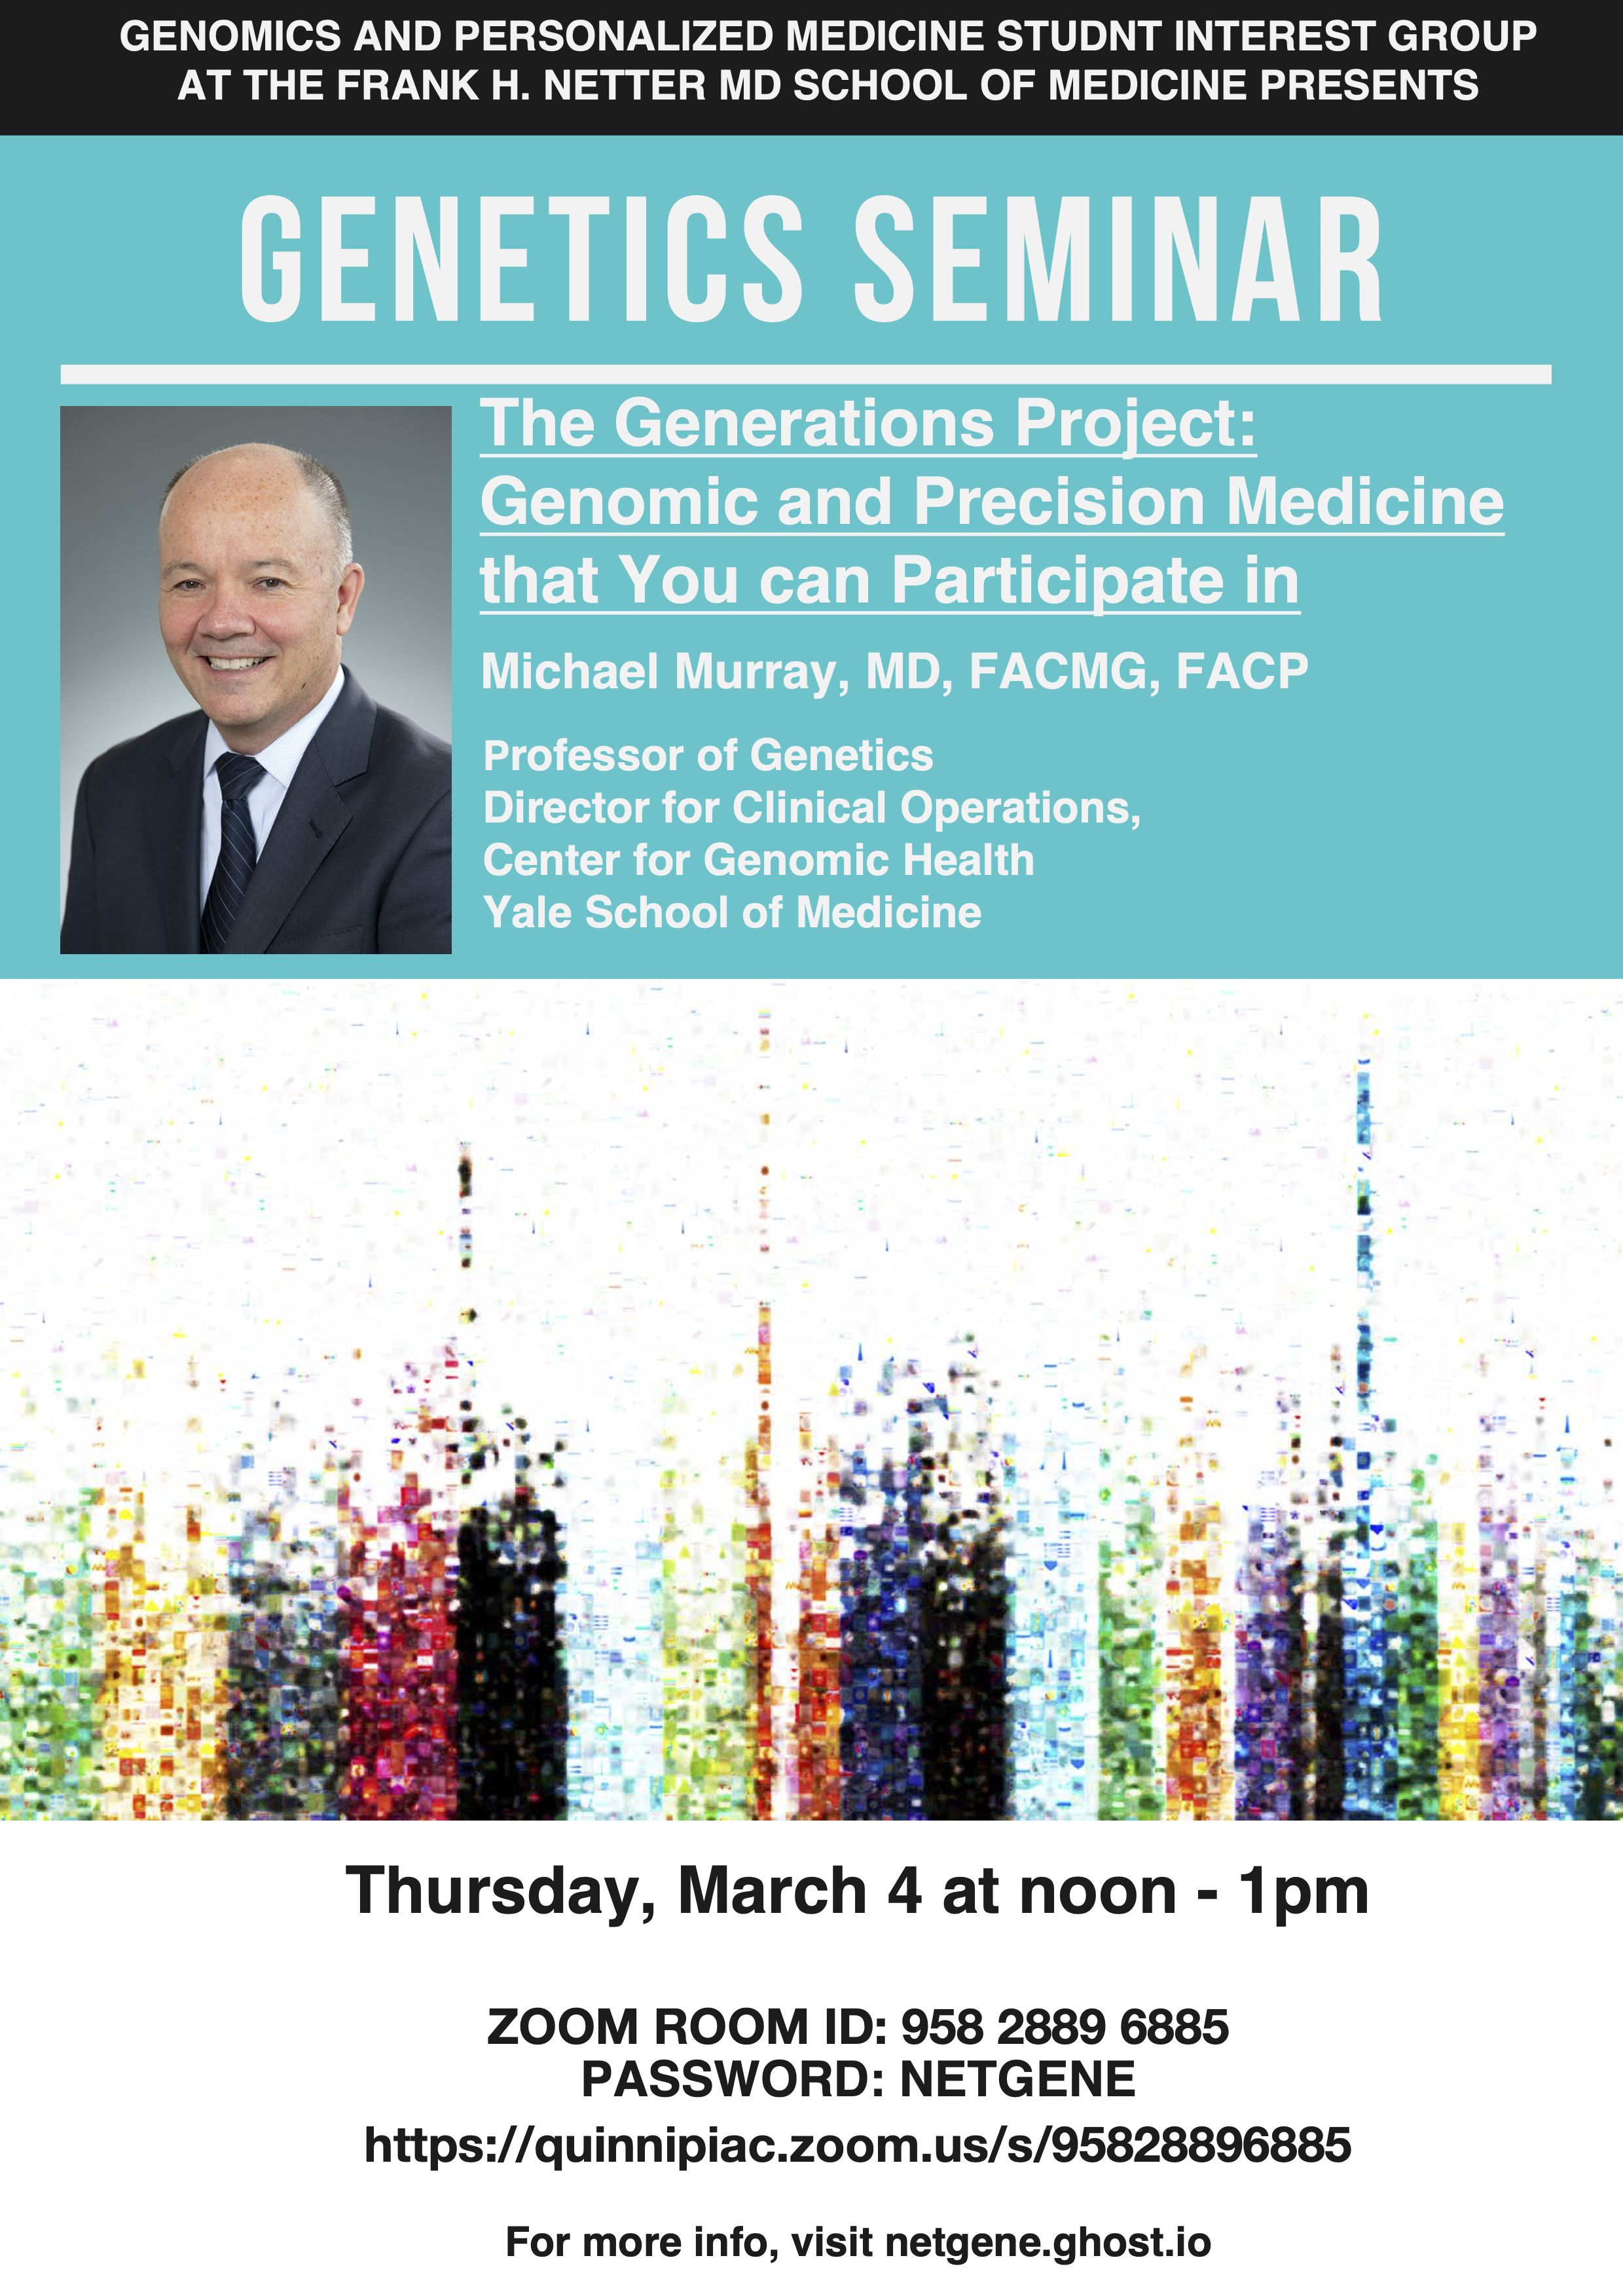 The Generations Project: Genomic and precision medicine that you can participate in